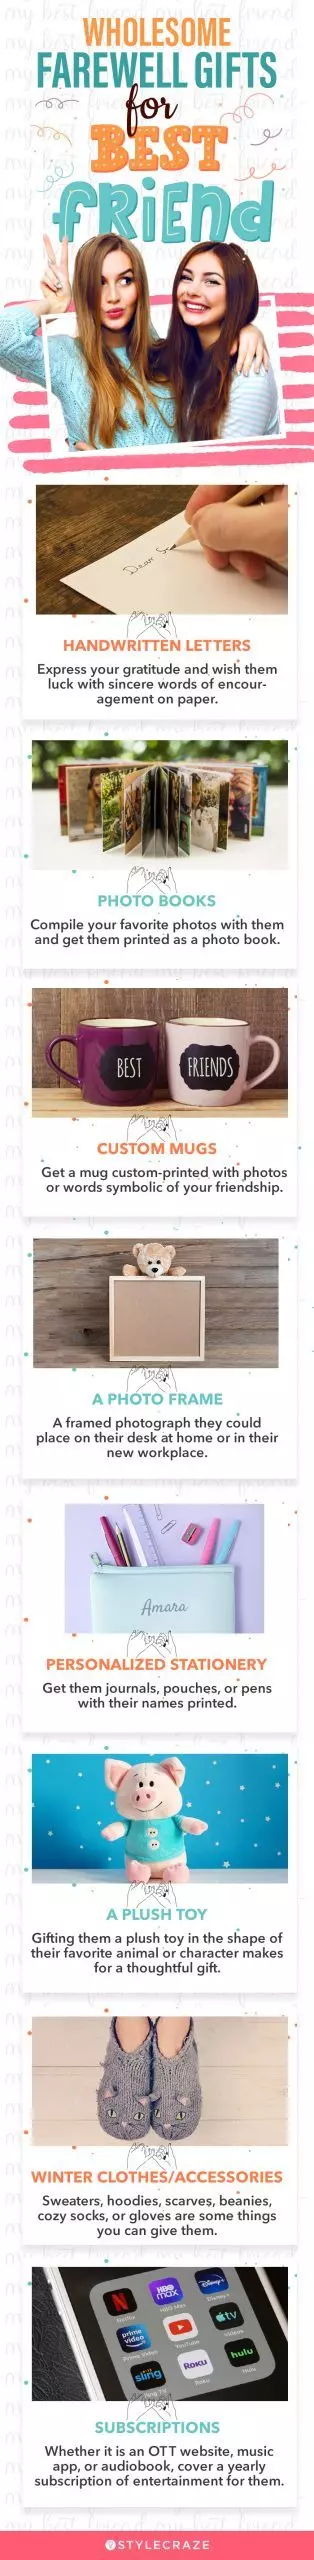 wholesome farewell gifts for best friend (infographic)